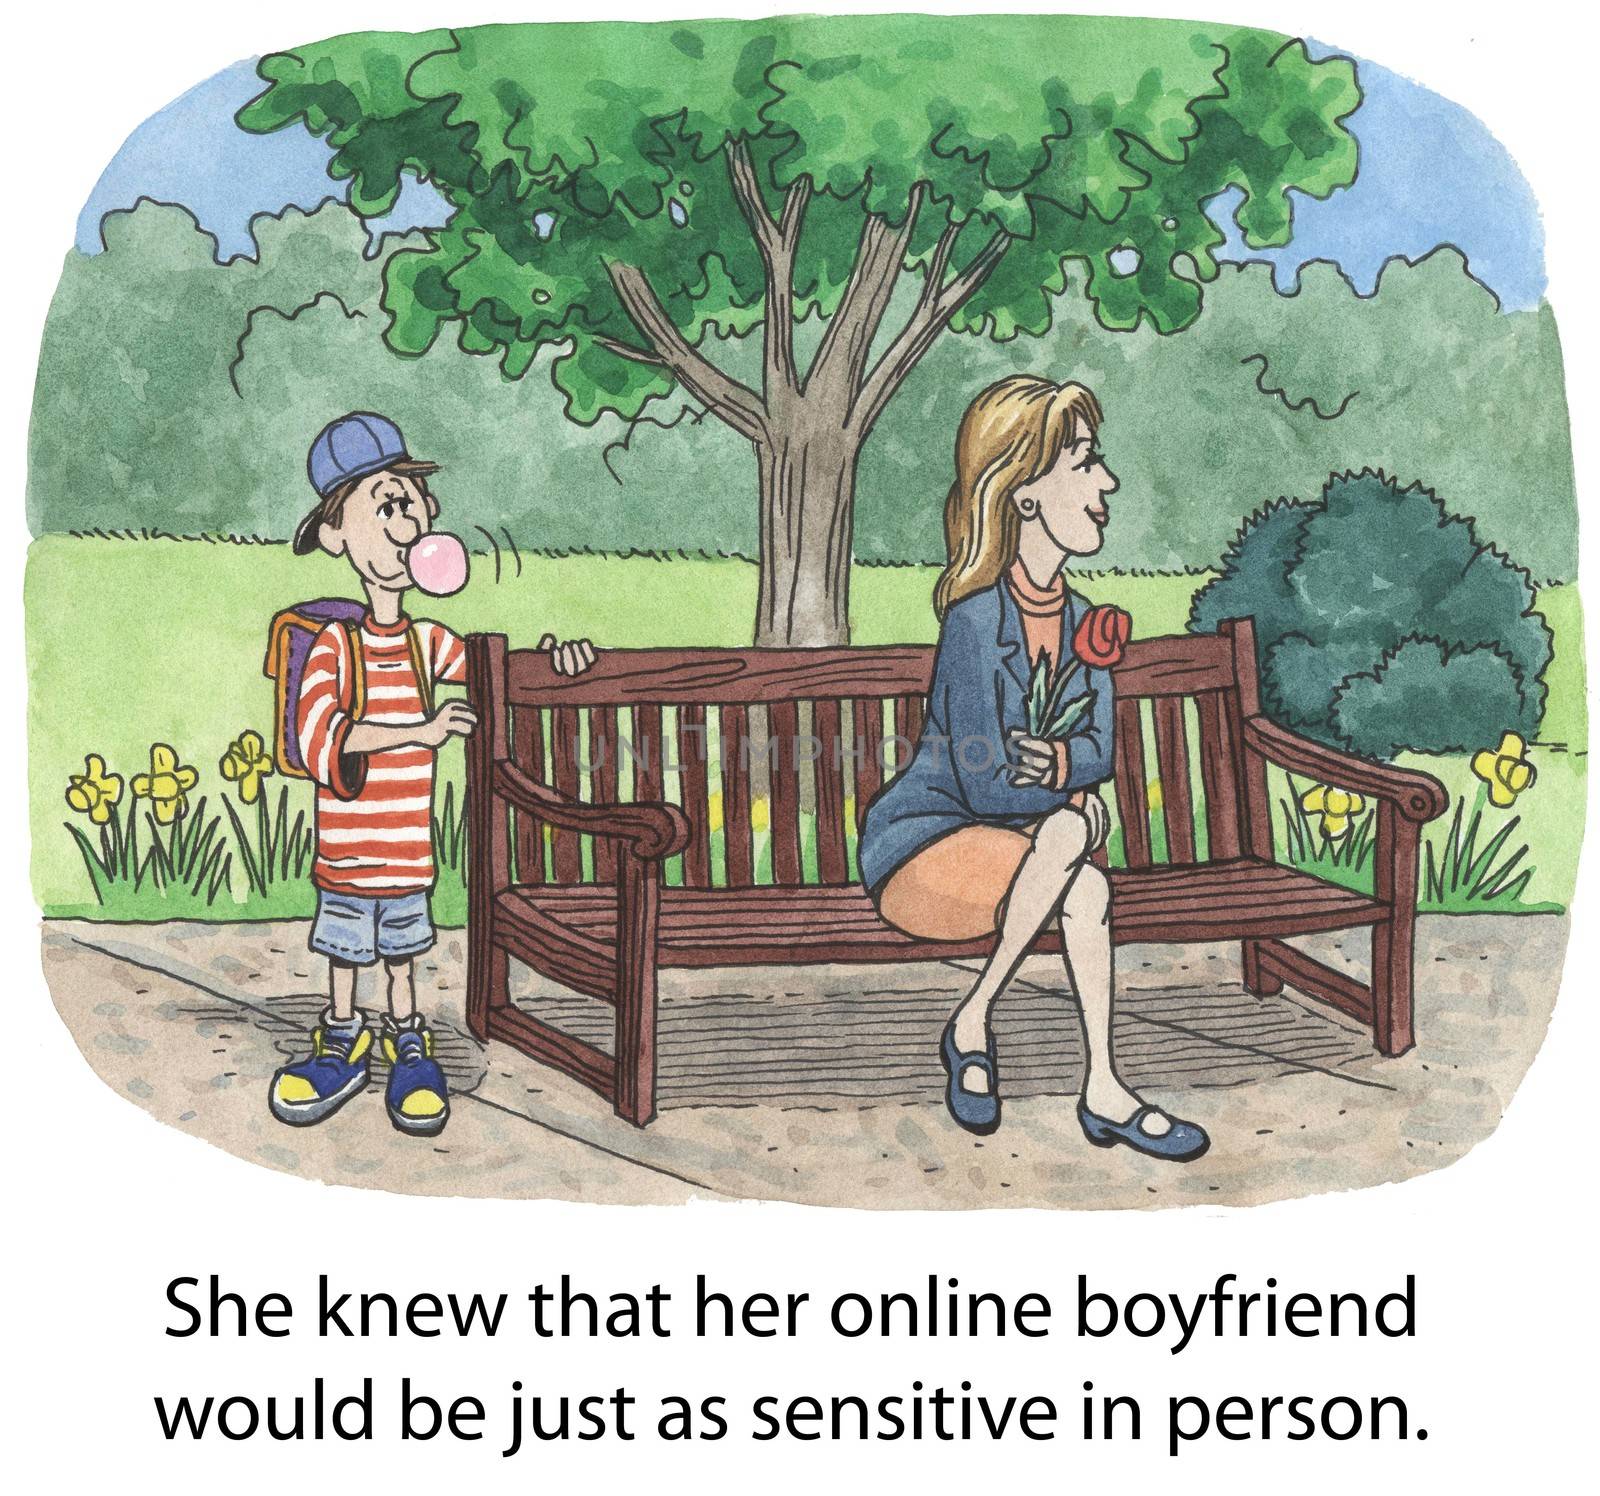 She knew that her online boyfriend would be just as sensitive in person.